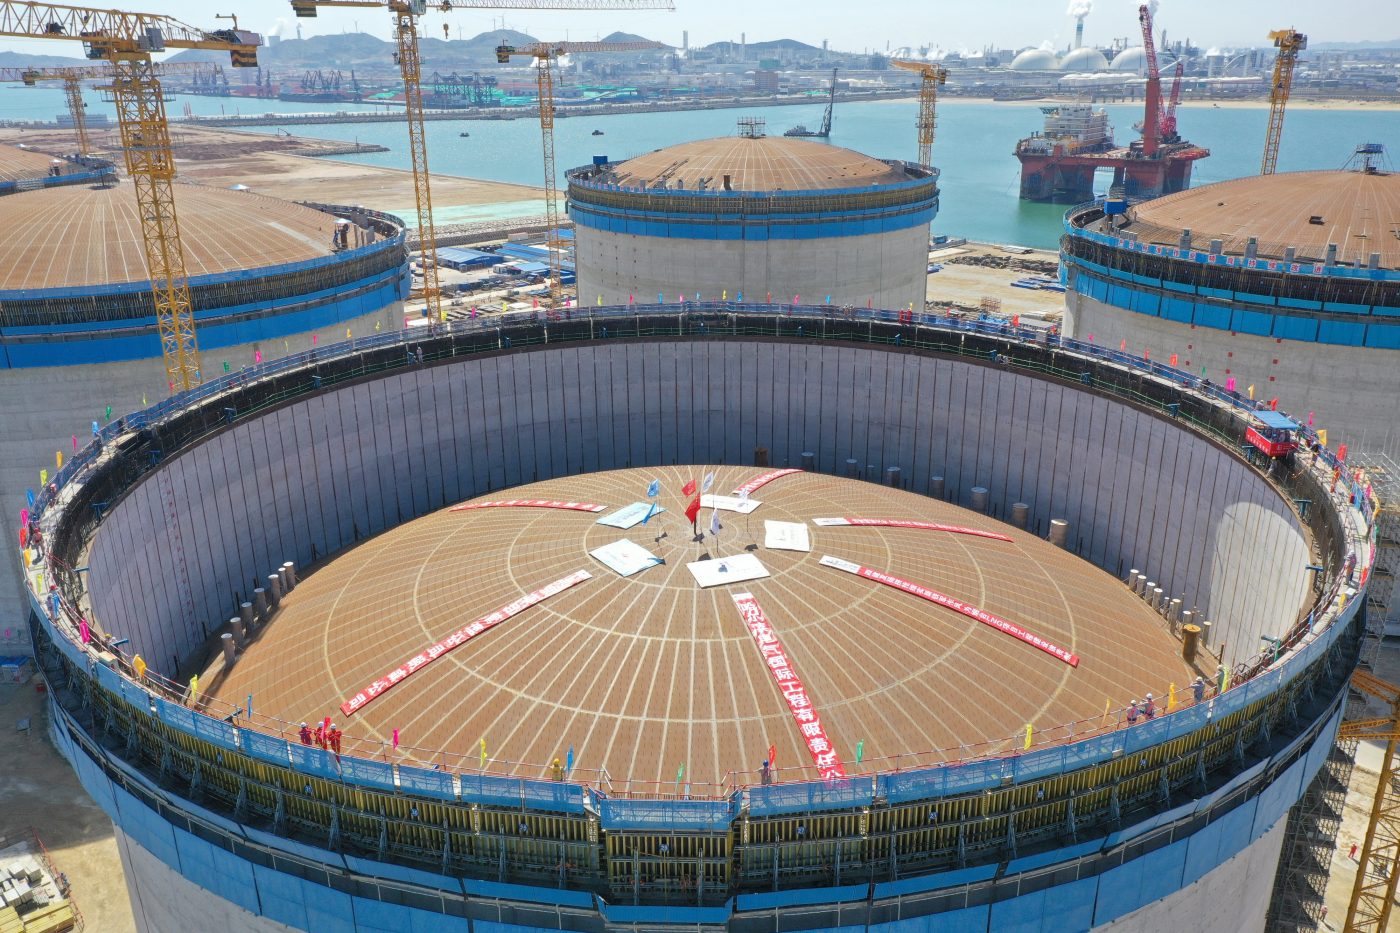 Photo: YANTAI, CHINA - APRIL 26, 2023 - An LNG tank is hoisted at the construction site of an LNG receiving station in the Xigang area of Yantai Port, Shandong Province, China, April 26, 2023. On April 26, 2023, the five 200,000 cubic meter storage tanks of the Xigang Area liquefied natural gas (LNG) receiving terminal project at Yantai Port in Shandong Province were completed, marking the transfer of the construction phase of the storage tanks from civil construction to installation. The LNG receiving station project is a key implementation project of the National Implementation Plan for the Construction of Liquefied Natural Gas Storage and Transportation System in the Bohai Rim Region. Upon completion, it will provide energy security for Shandong, Bohai Rim and even North China in a sustainable and stable manner, and enhance regional peak regulation, gas storage and winter supply protection capabilities. Credit: Photo by CFOTO/Sipa USA